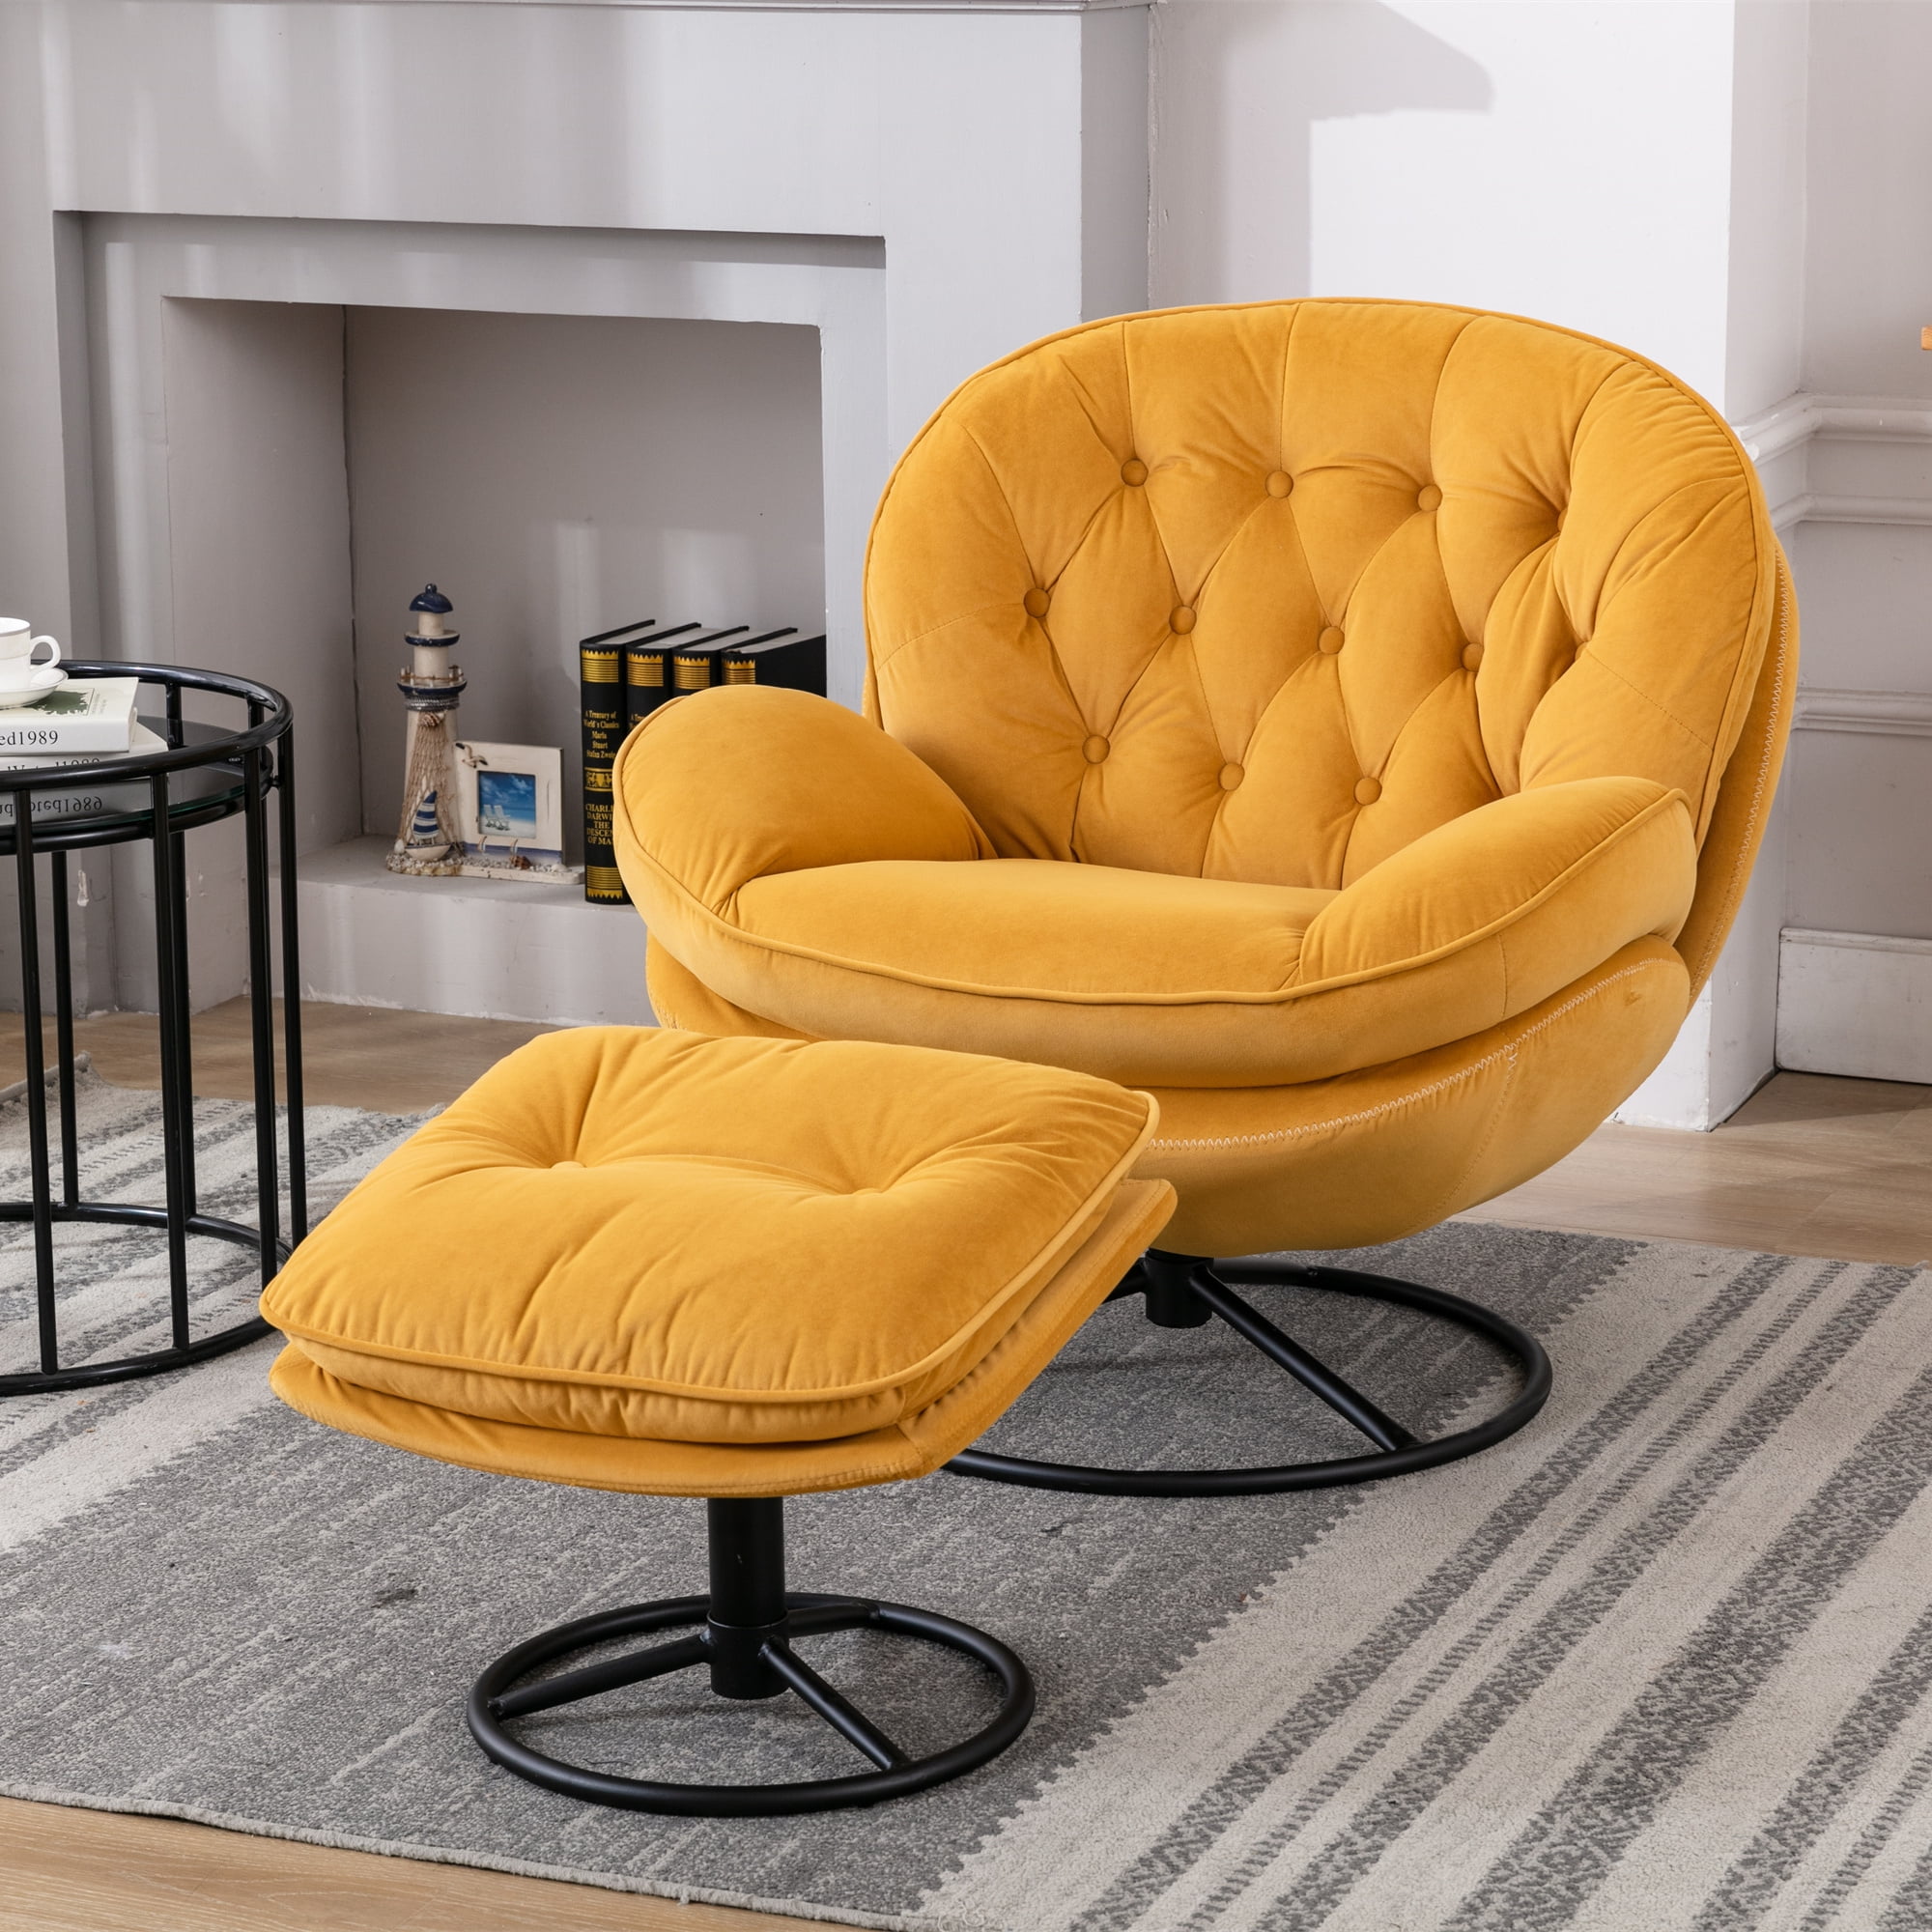 Swivel Armchair With Ottoman For Living Room, Bedroom And Office